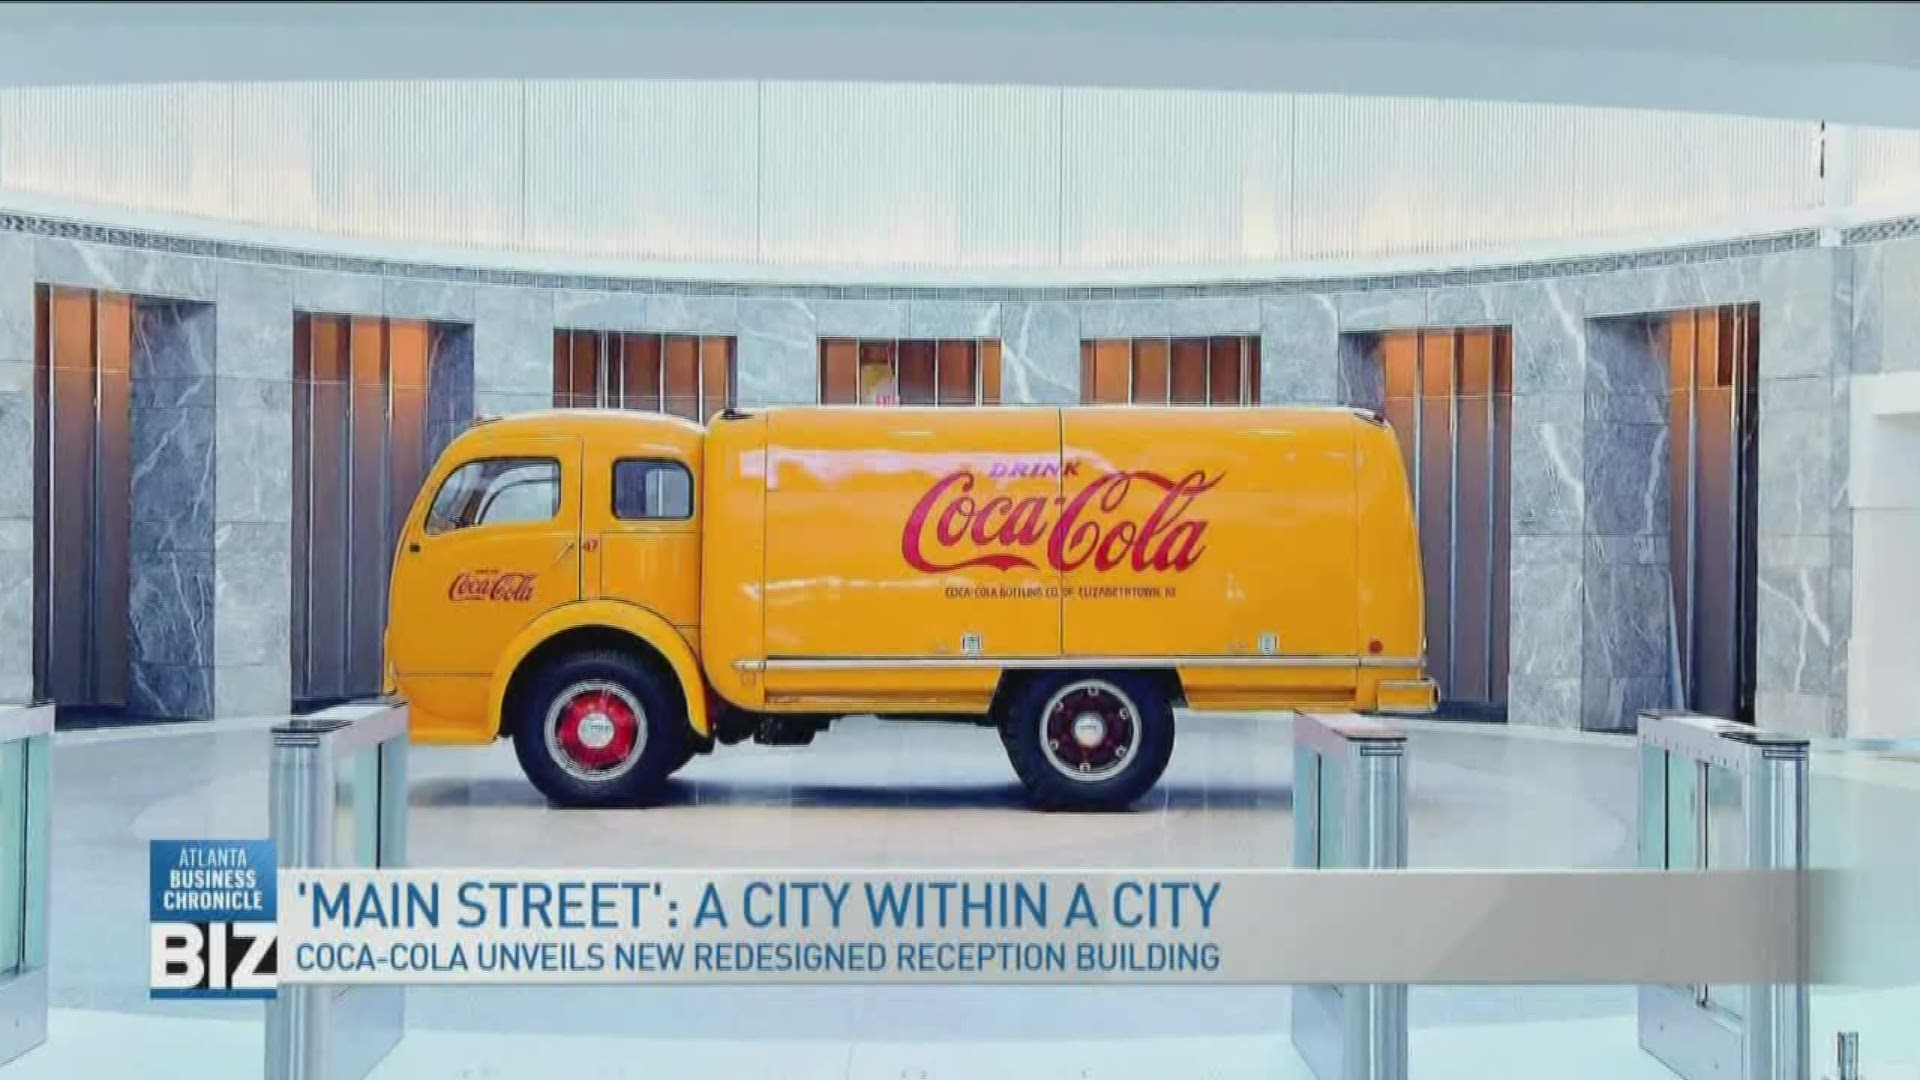 Check out Coca-Cola's new central reception building at their global headquarters on 'Atlanta Business Chronicle's BIZ'